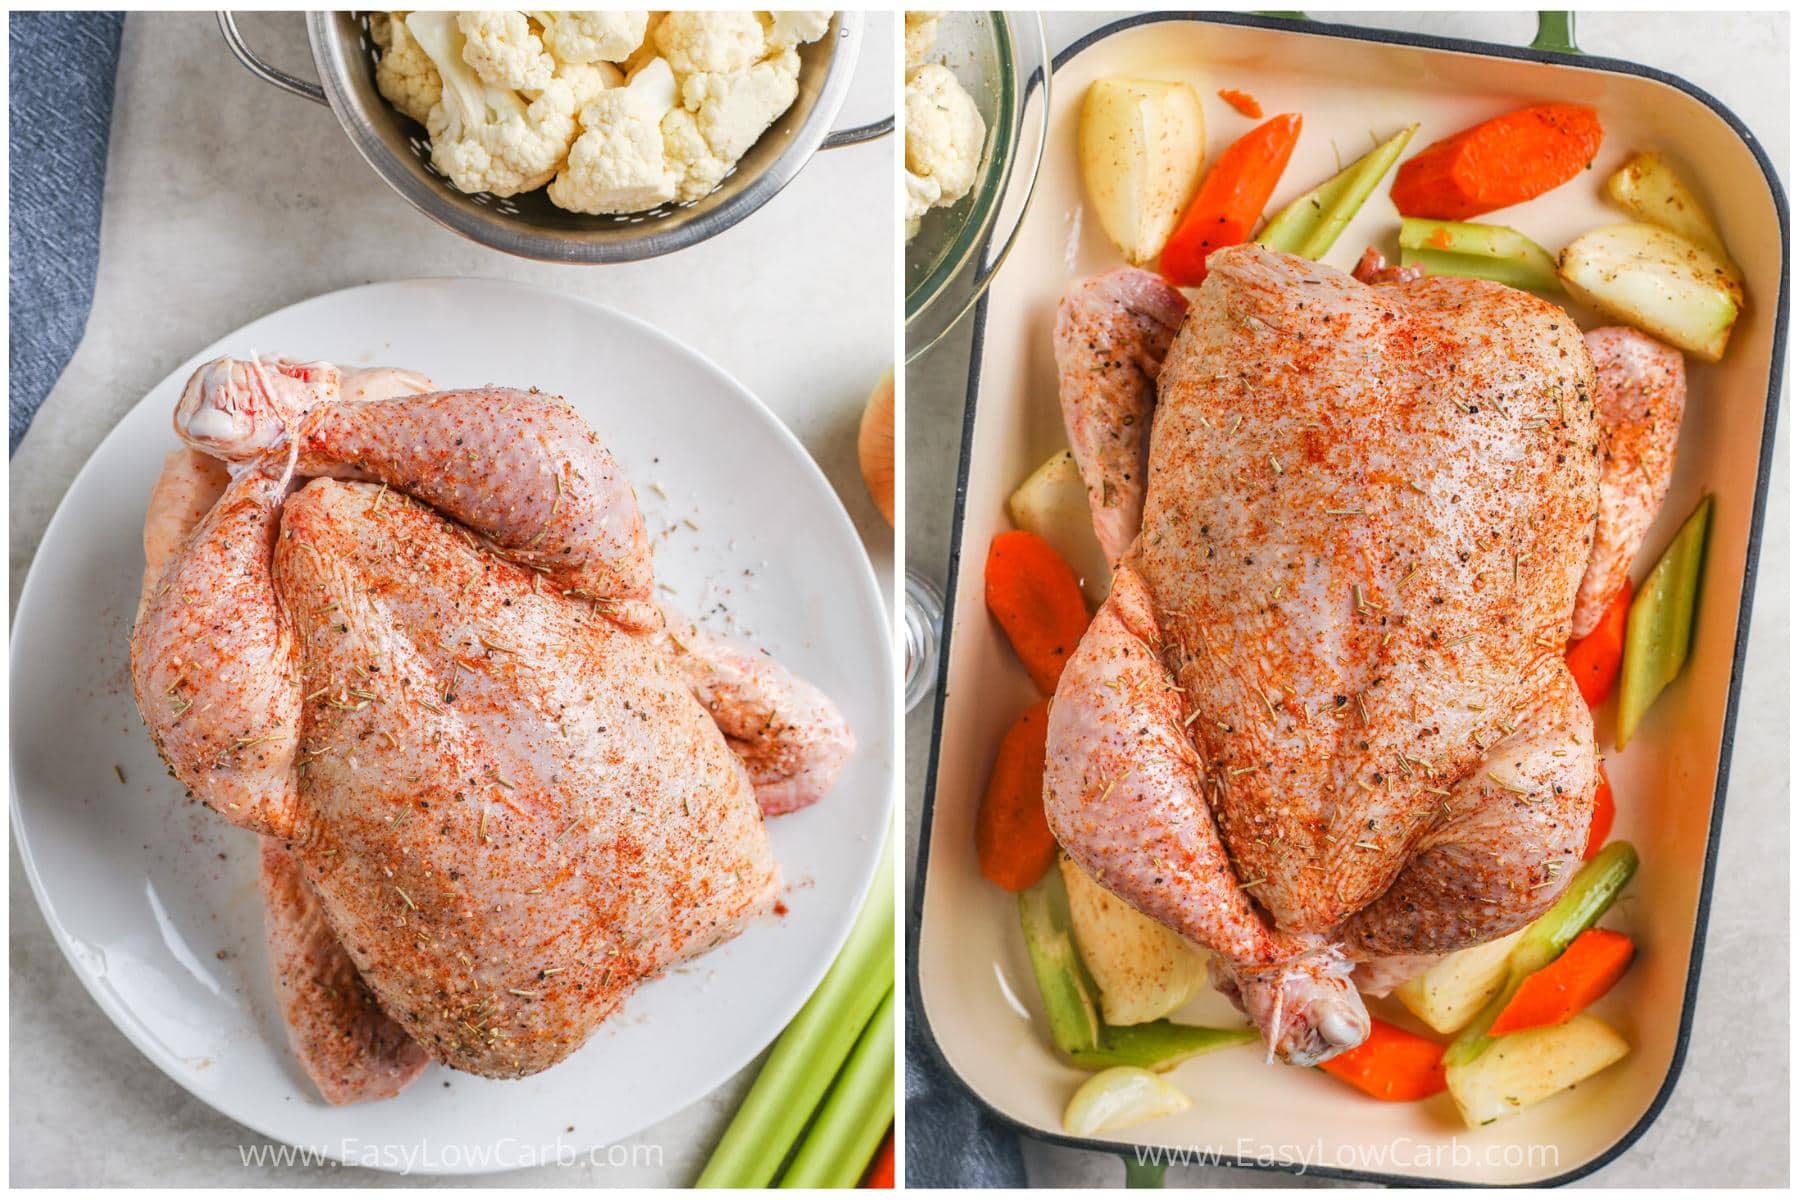 process of seasoning ingredients and putting in dish to make Roasted Chicken and Vegetables